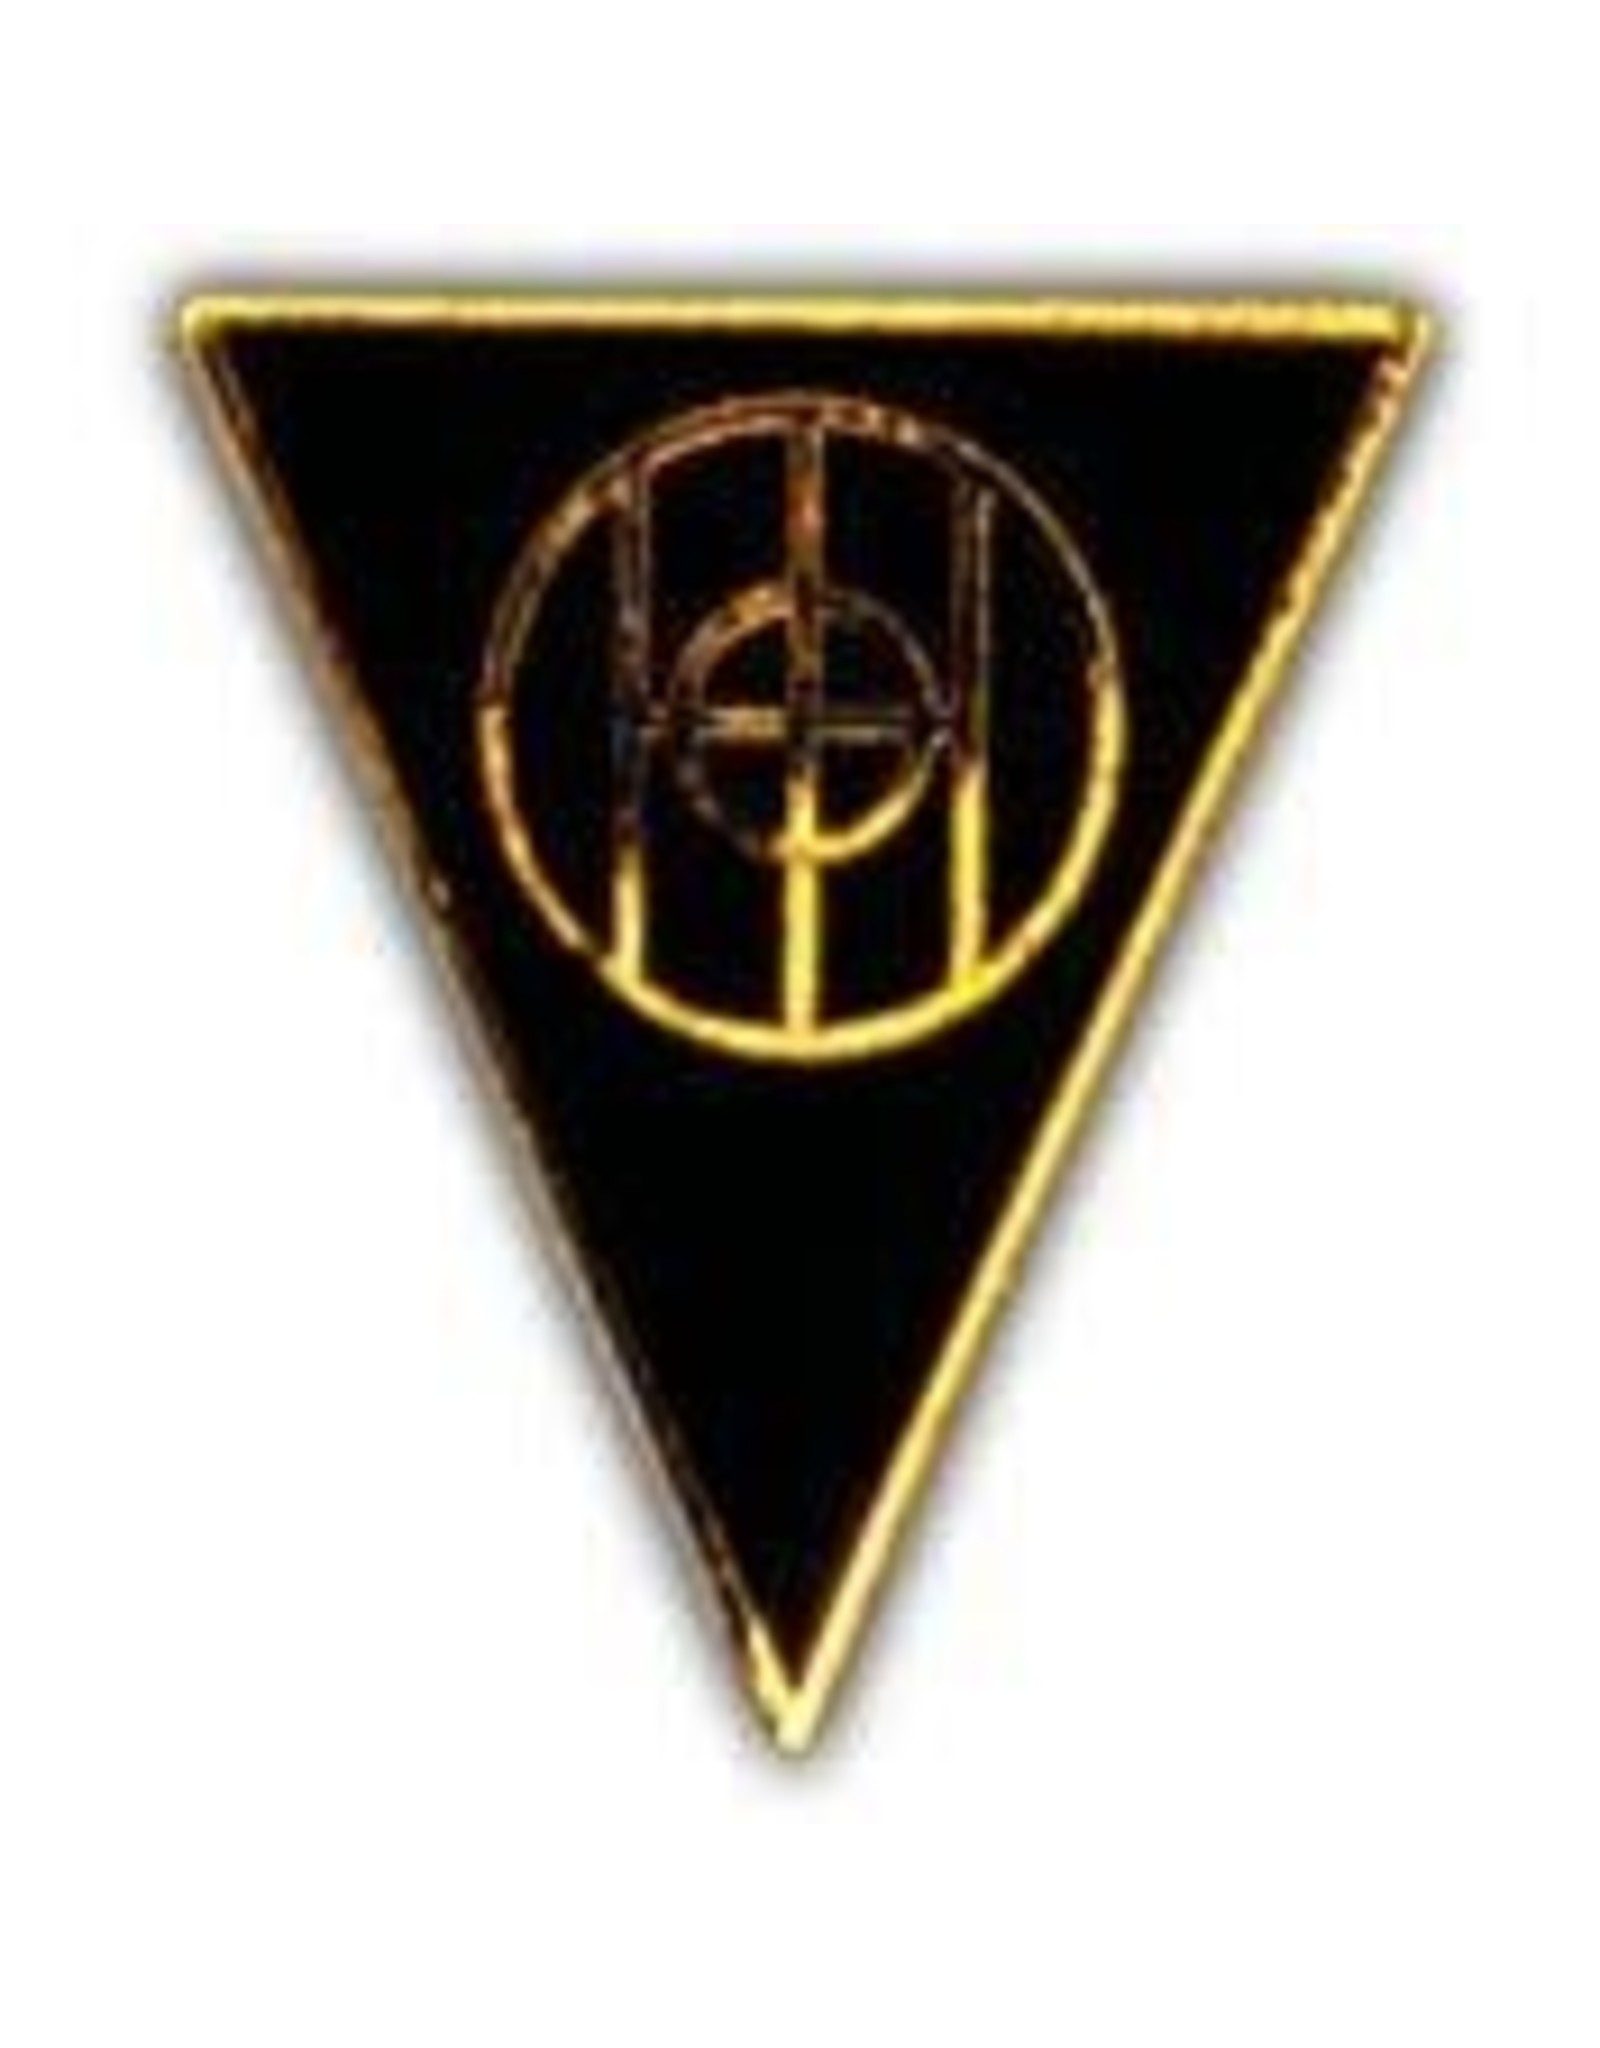 Pin - Army 83rd Infantry Division